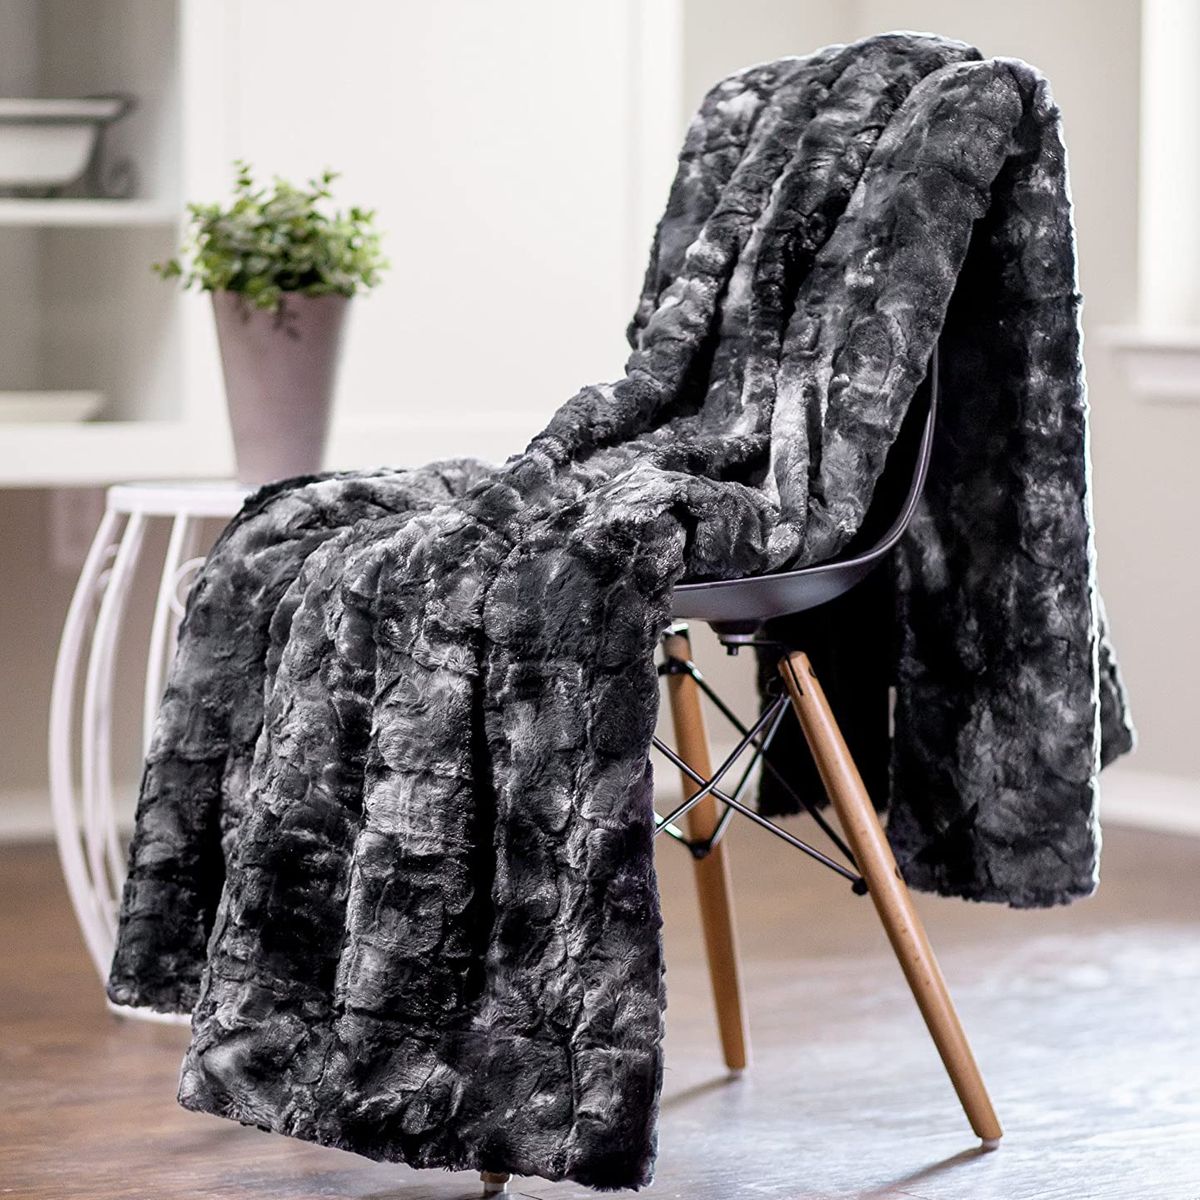 Comfortable Plush Fluffy Long Hair Faux Fur Blanket Cover-Luxurious Warm and Soft Twins Sherpa Blanket Throw Blanket Lover Gift